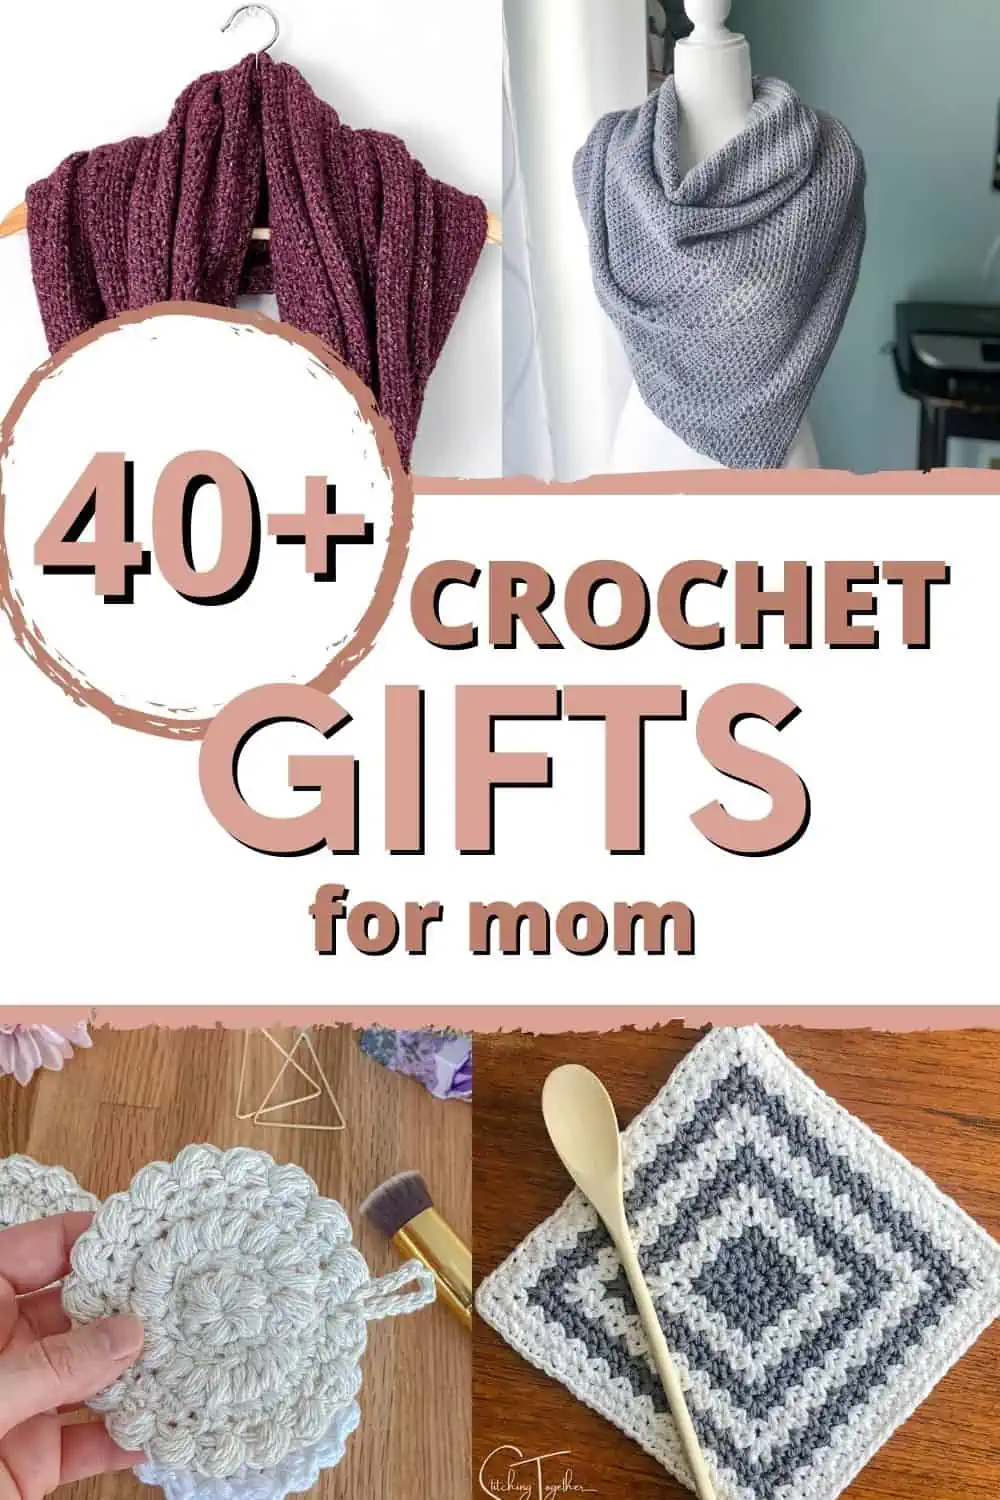 graphic reading "40+ crochet gifts for mom" with collage of different crochet items